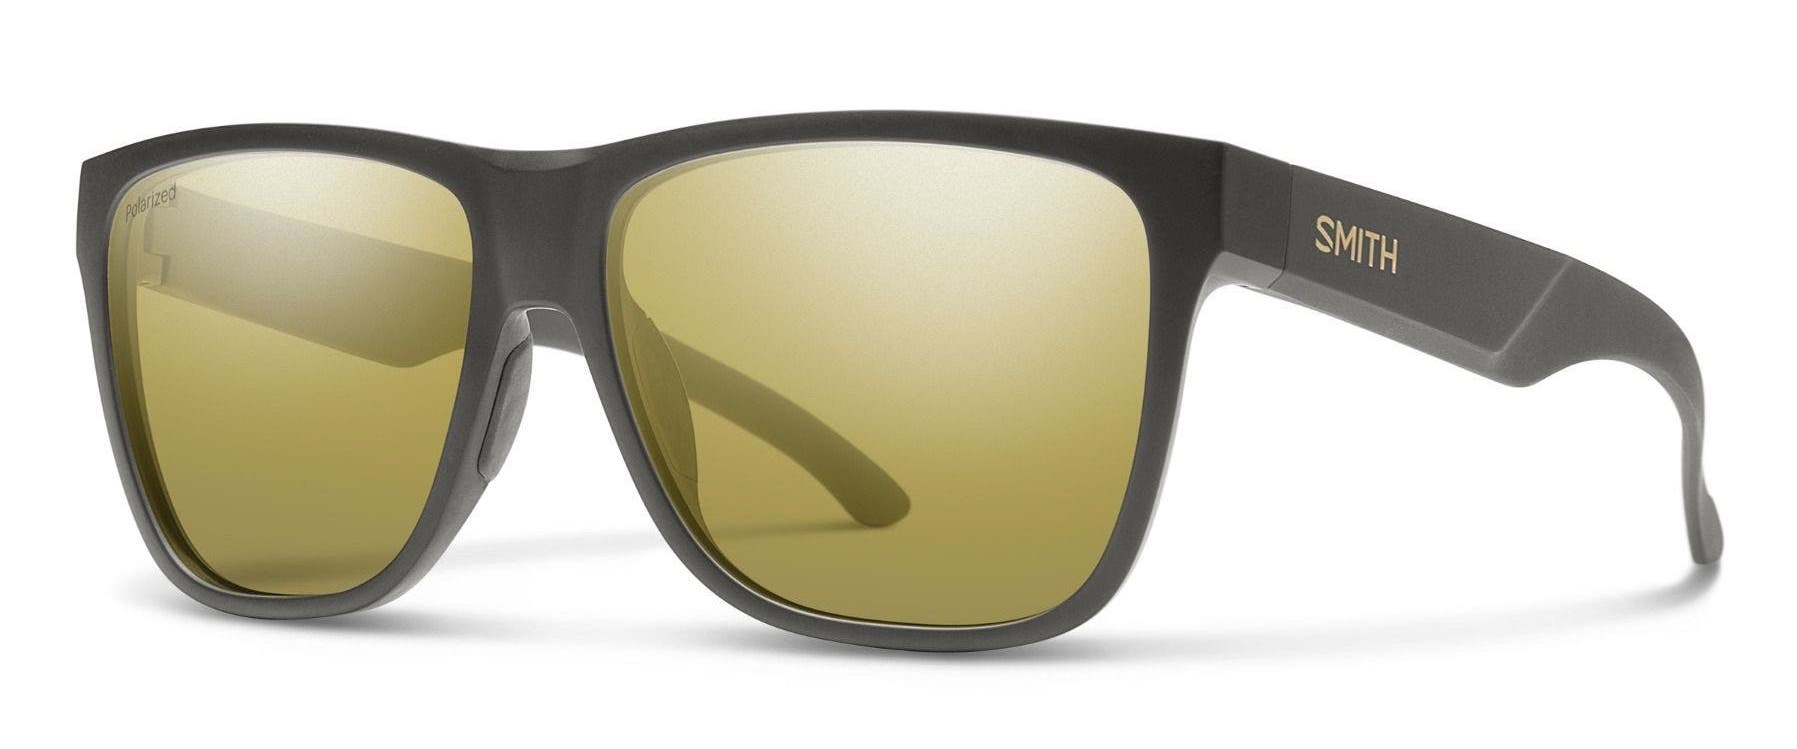 smith lowdown xl 2 sunglasses in grey with gold lenses in lineup of best athleisure sunglasses for big heads